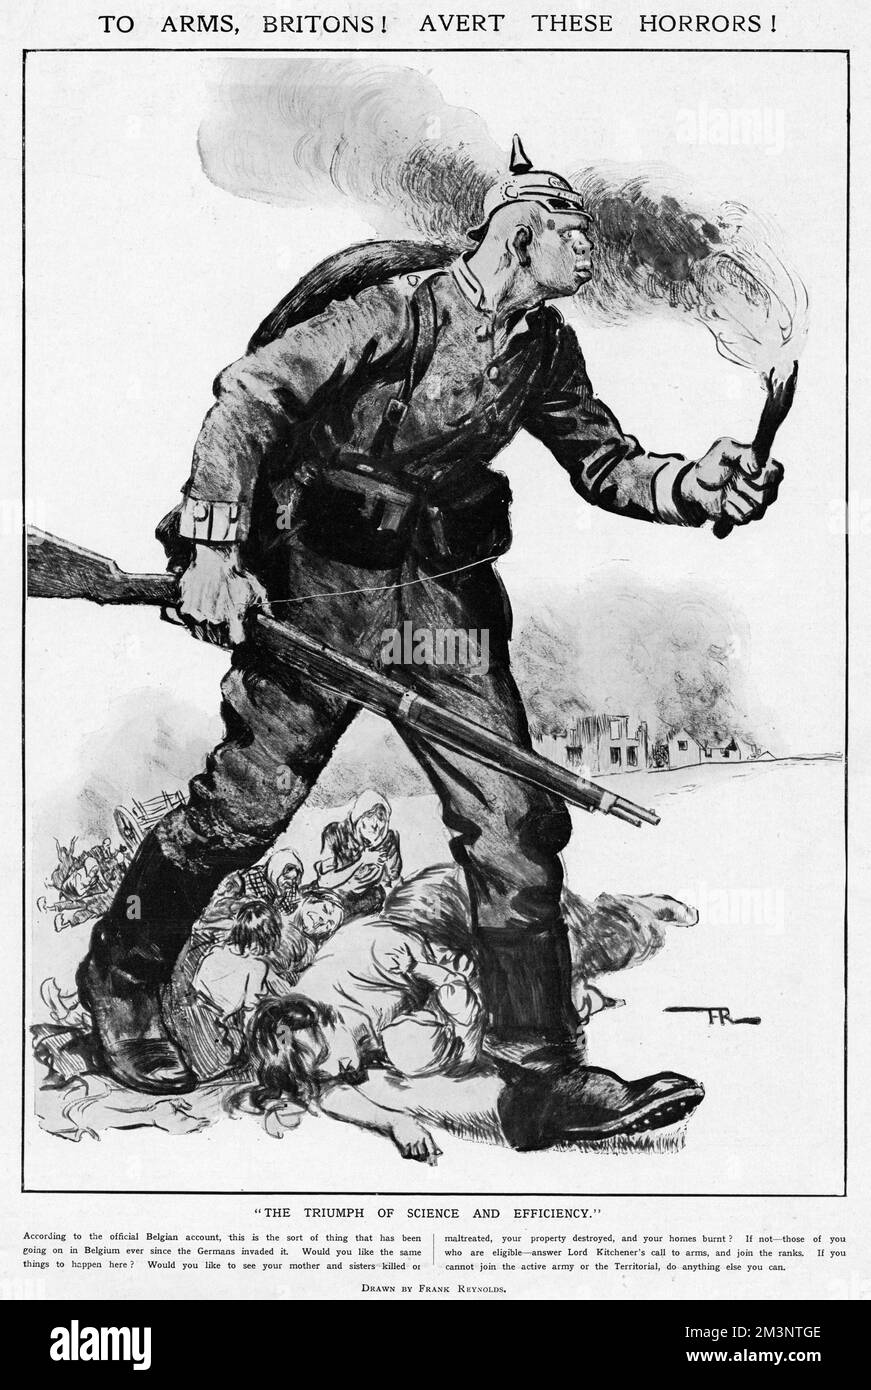 &quot;Arms, Britons! Avert These Horrors: The Triumph of Science and Efficiency.&quot;    A typical propagandist reminder to the British of what they were fighting for, this brutish German soldier, half-ogre, trampling innocent Belgian women and children underfoot, pulls no punches, although its savageness is unusual for &quot;The Sketch&quot;. The caption asks, &quot;Would you like the same things to happen here? Would you like to see your mother and sisters killed or maltreated your property destroyed and your homes burnt? If not -those of you who are eligible -answer Lord Kitchener's call t Stock Photo